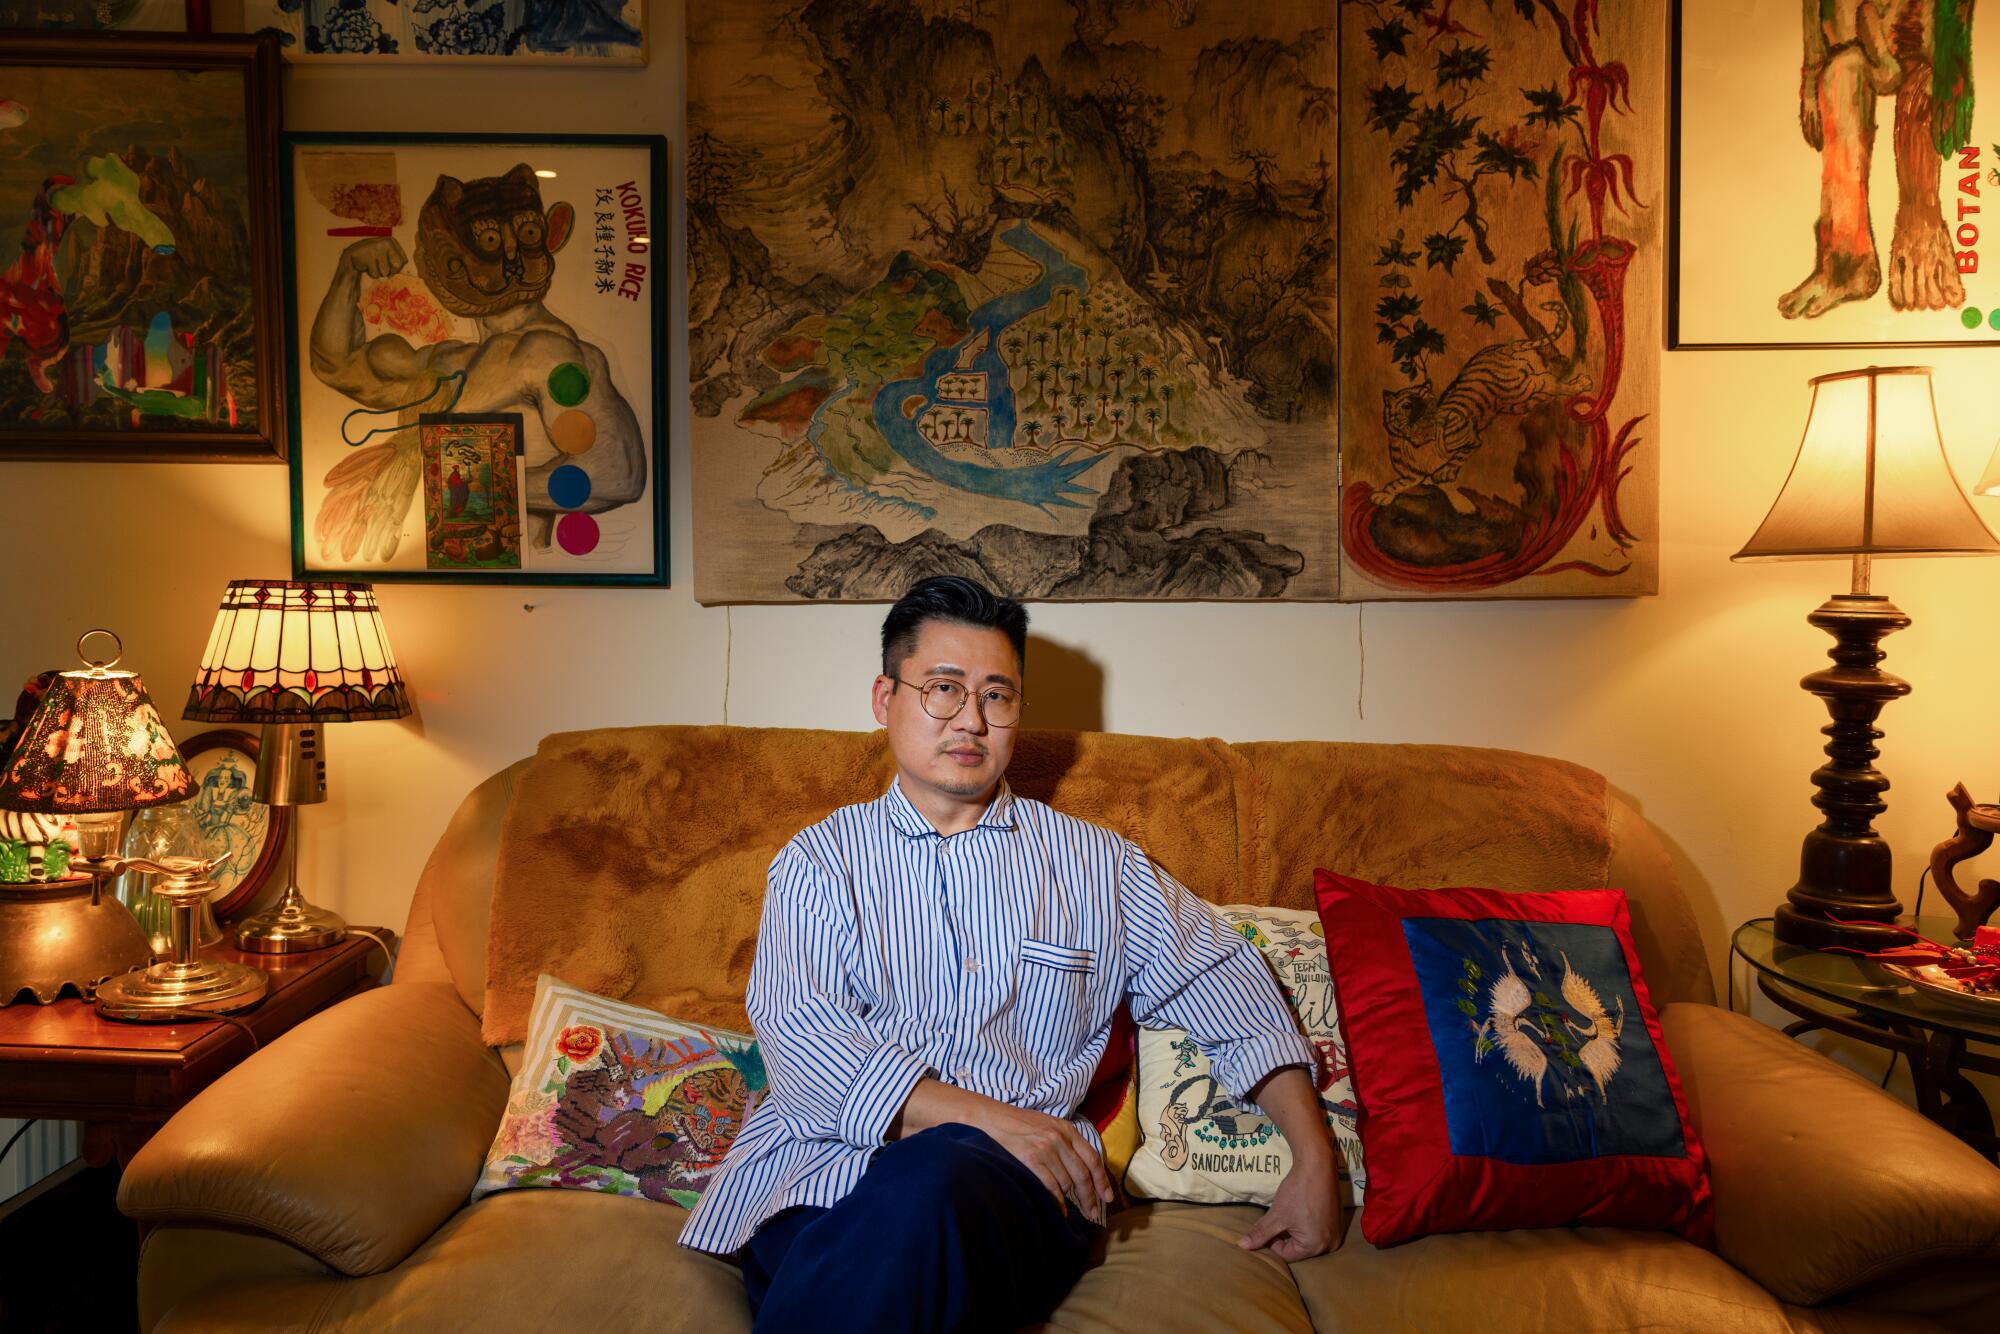 Artist Ken Gun Min sits on a couch surrounded by his artworks